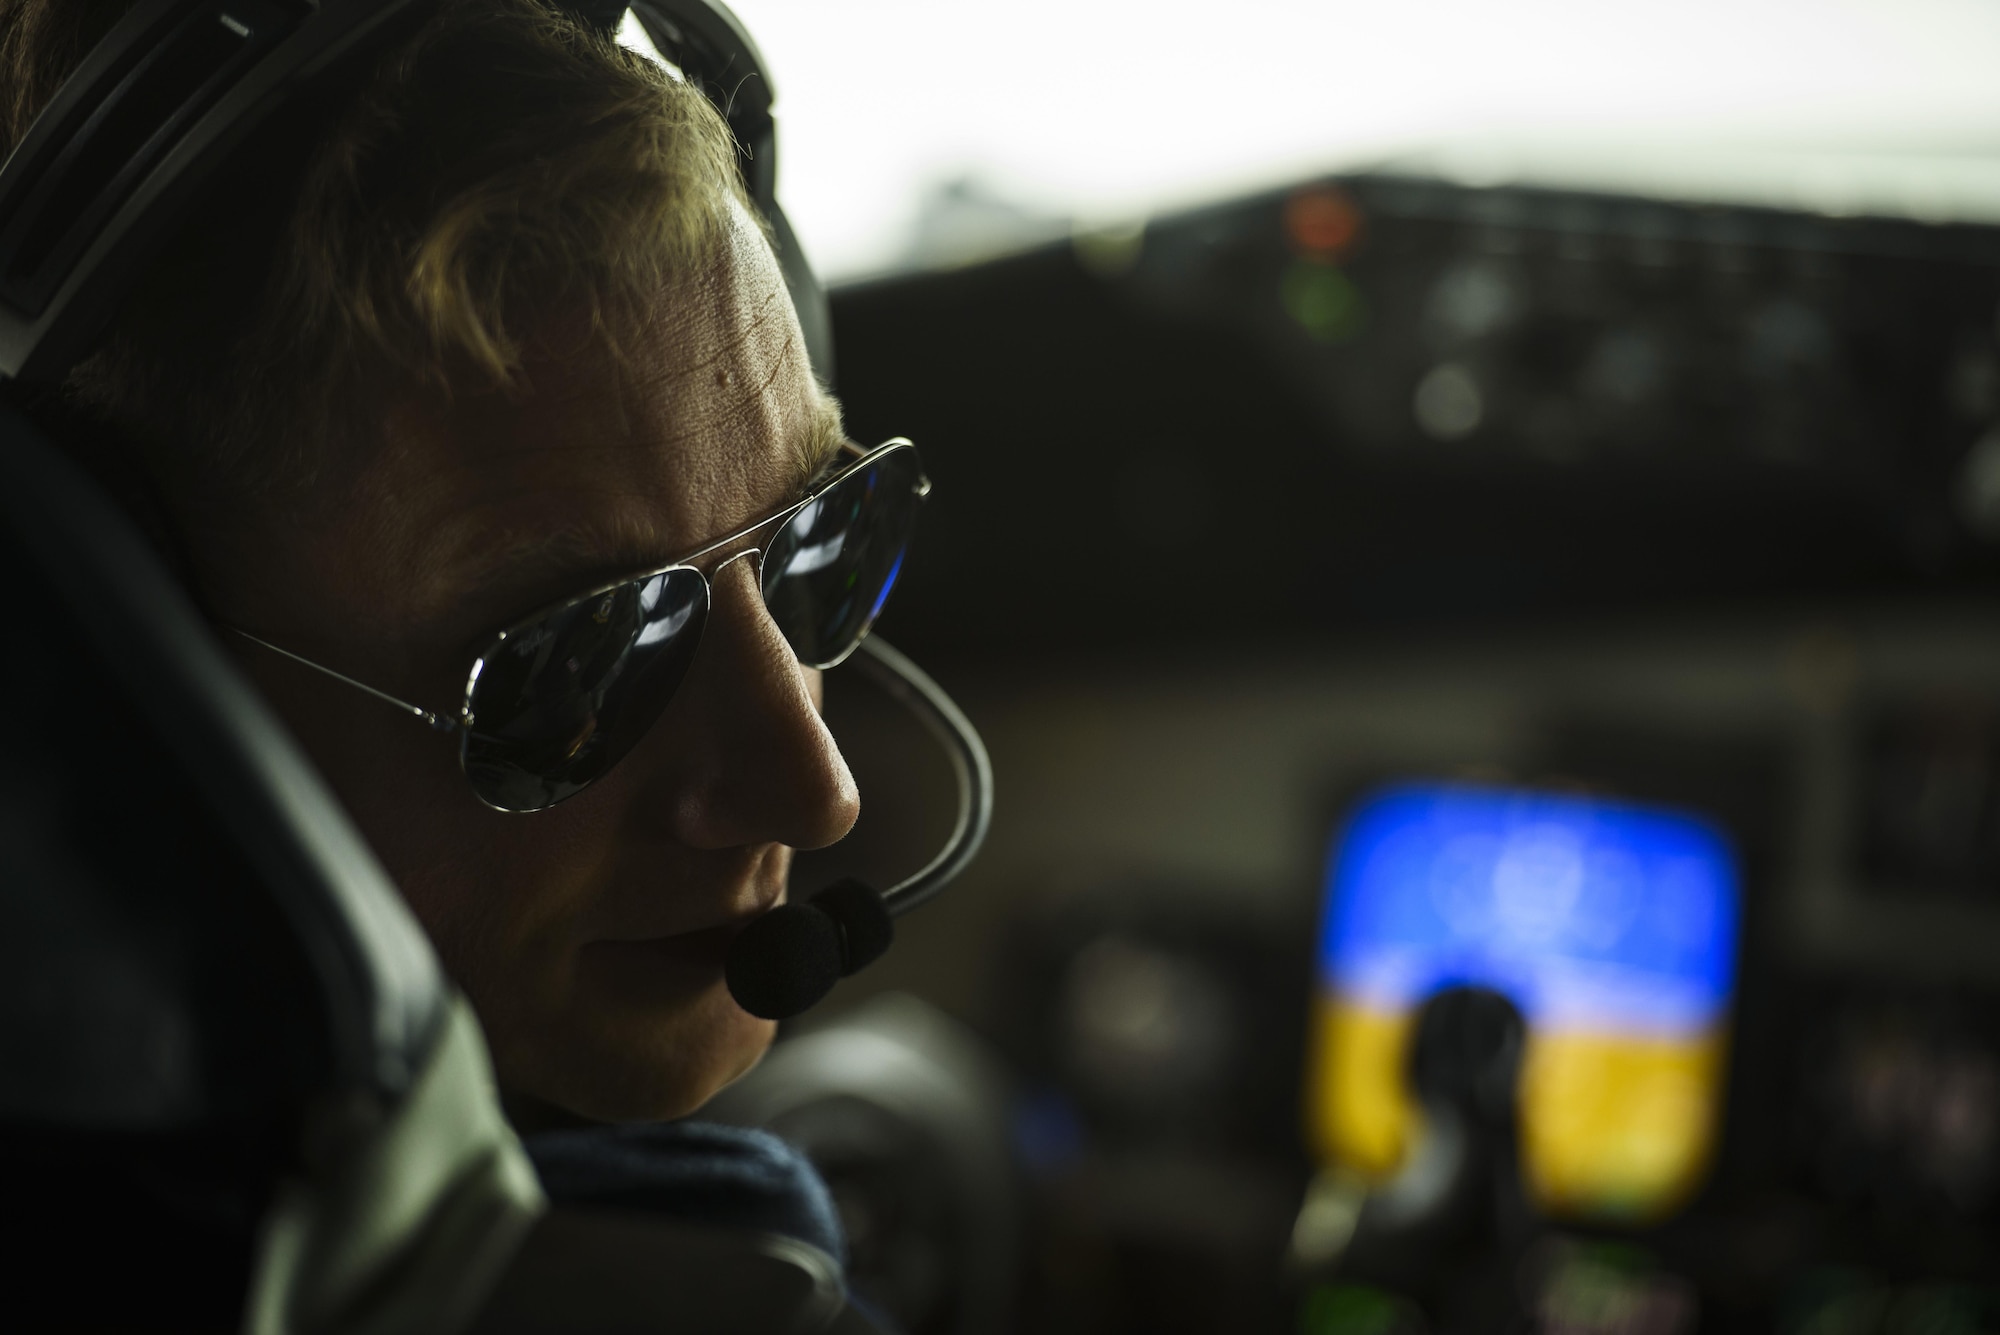 Capt. Donald Hart, 351st Air Refueling Squadron pilot, talks with the crew prior to taxiing a KC-135R Stratotanker during BALTOPS exercise at Powidz Air Base, Poland, June 7, 2017. The U.S. Air Force is supporting this exercise with approximately 900 Airmen, eight F-16s from the 31st Fighter Wing, Aviano Air Base, Italy, four KC-135 Stratotankers from the 100th Air Refueling Wing, RAF Mildenhall, U.S. Air Force Reserve 459th Air Refueling Wing, Joint Base Andrews, Maryland, one Air Force Reserve E-3 Airborne Warning and Control System (AWACS) from the 513th Aerial Control Group, B-52s from RAF Fairford, Tinker Air Force Base, Oklahoma and Airmen from the 1st Combat Communication Squadron, Ramstein Air Base, Germany are supporting this multinational exercise. (U.S. Air Force photo by Staff Sgt. Jonathan Snyder)